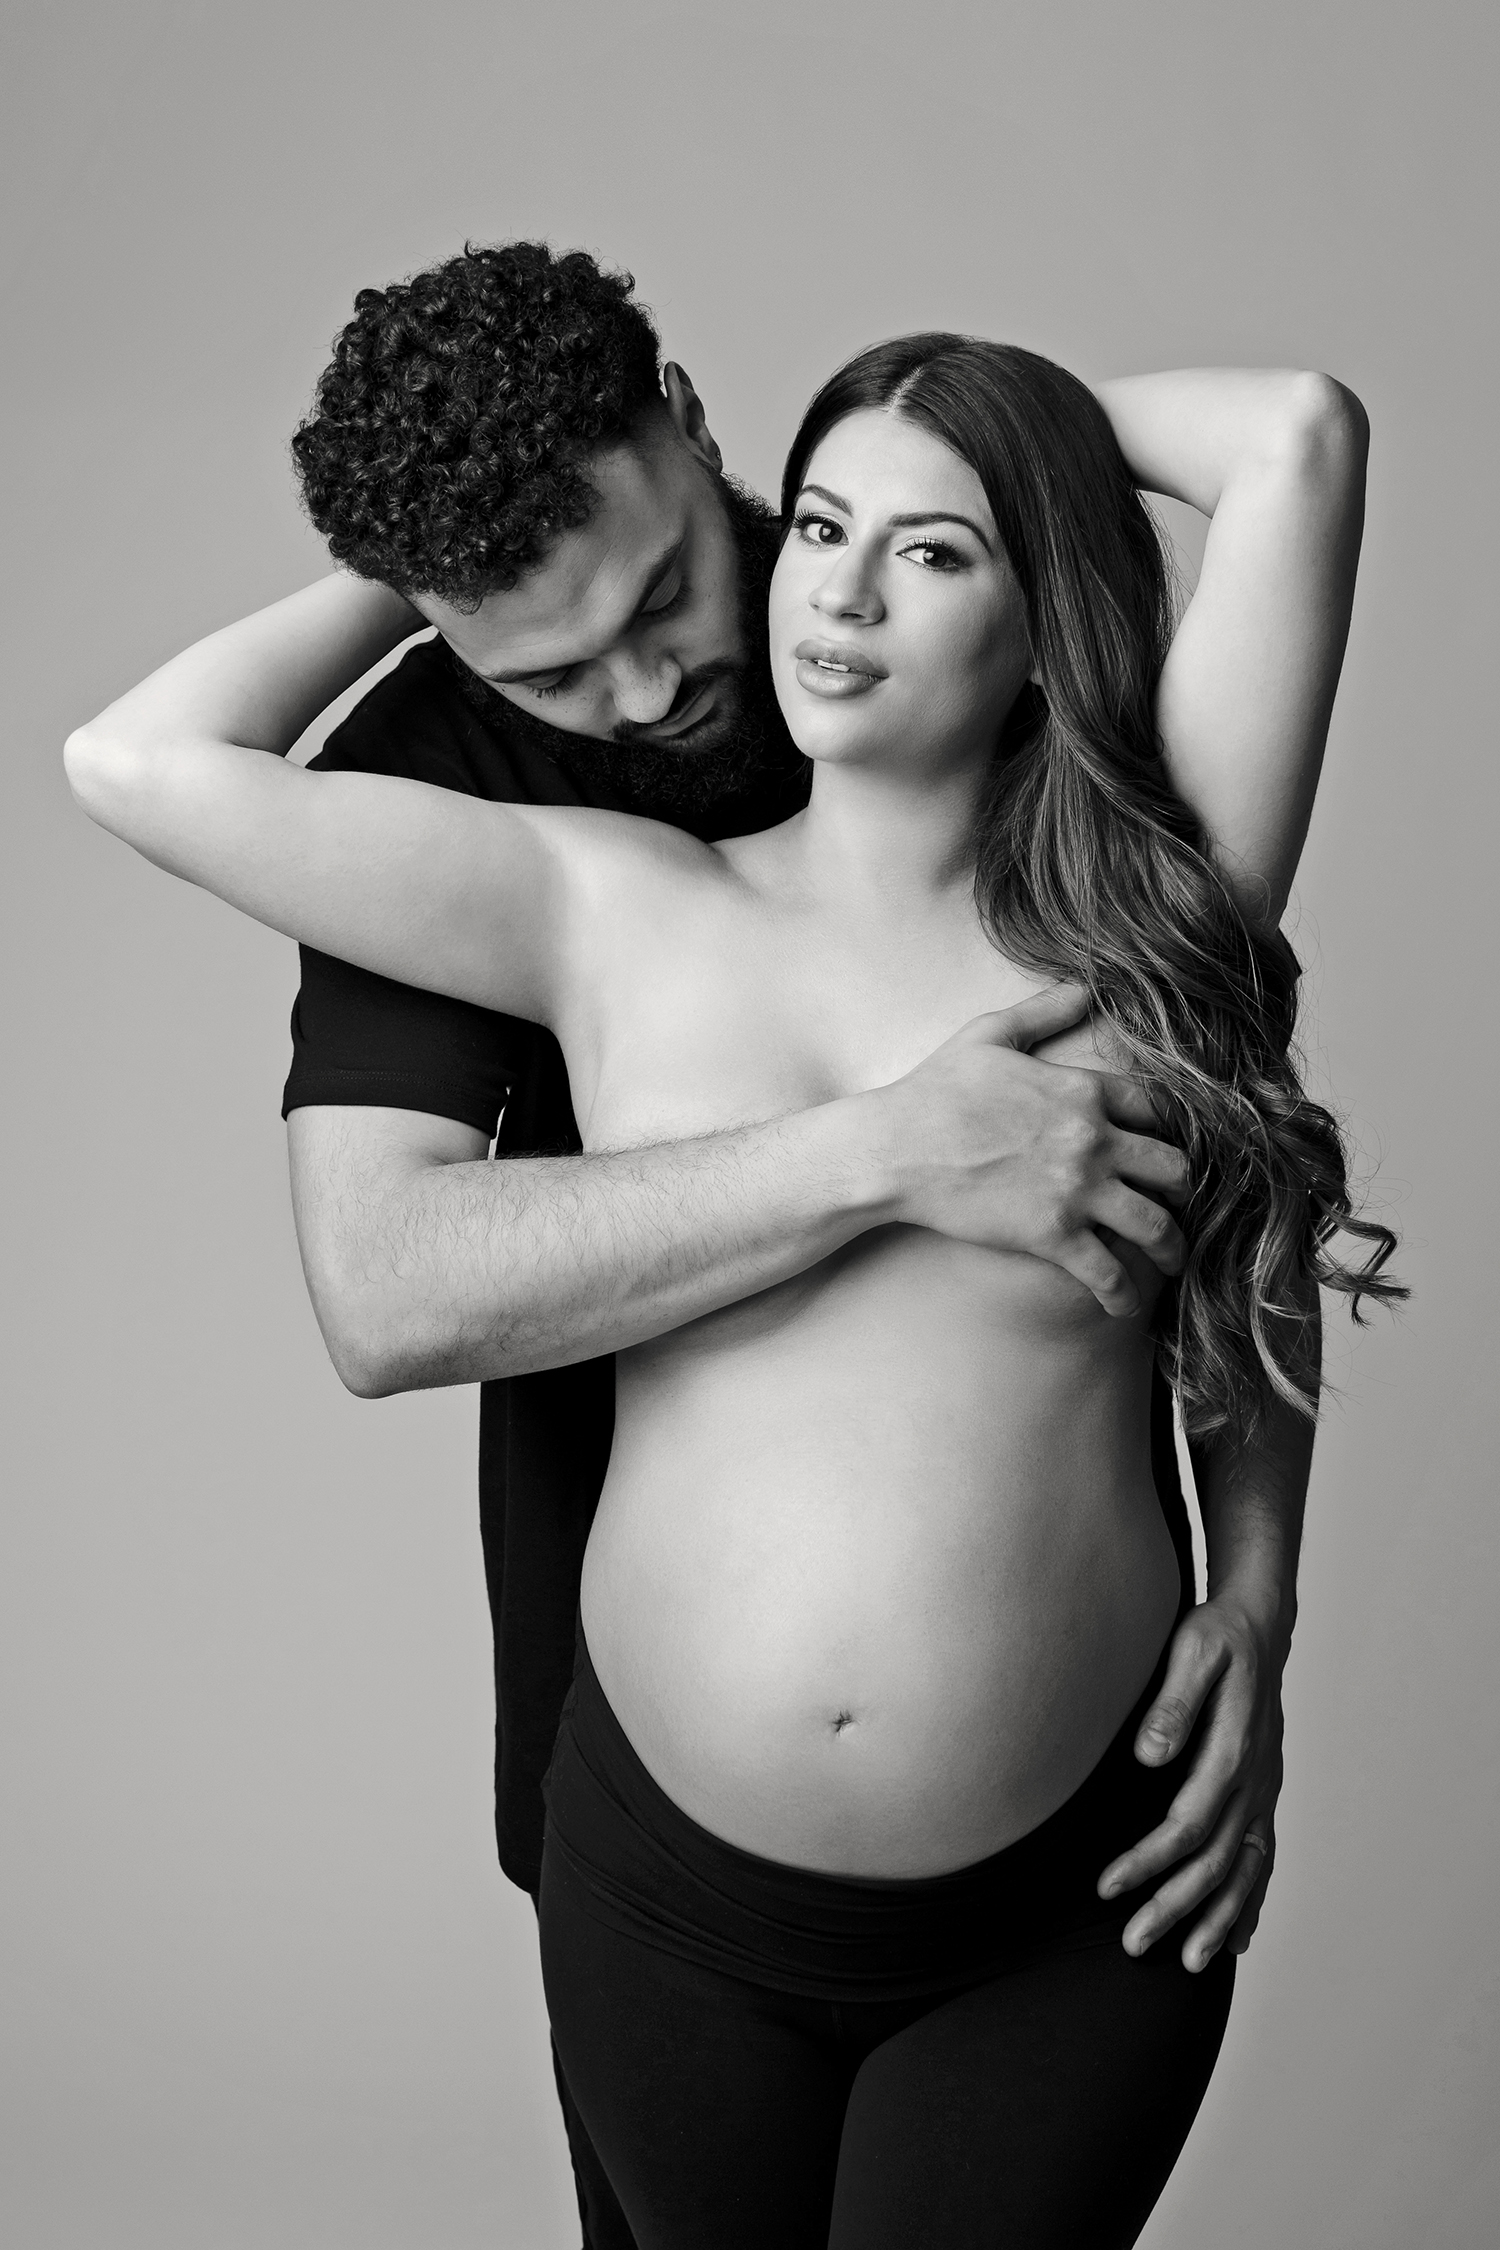 A couple embraces during a maternity photoshoot